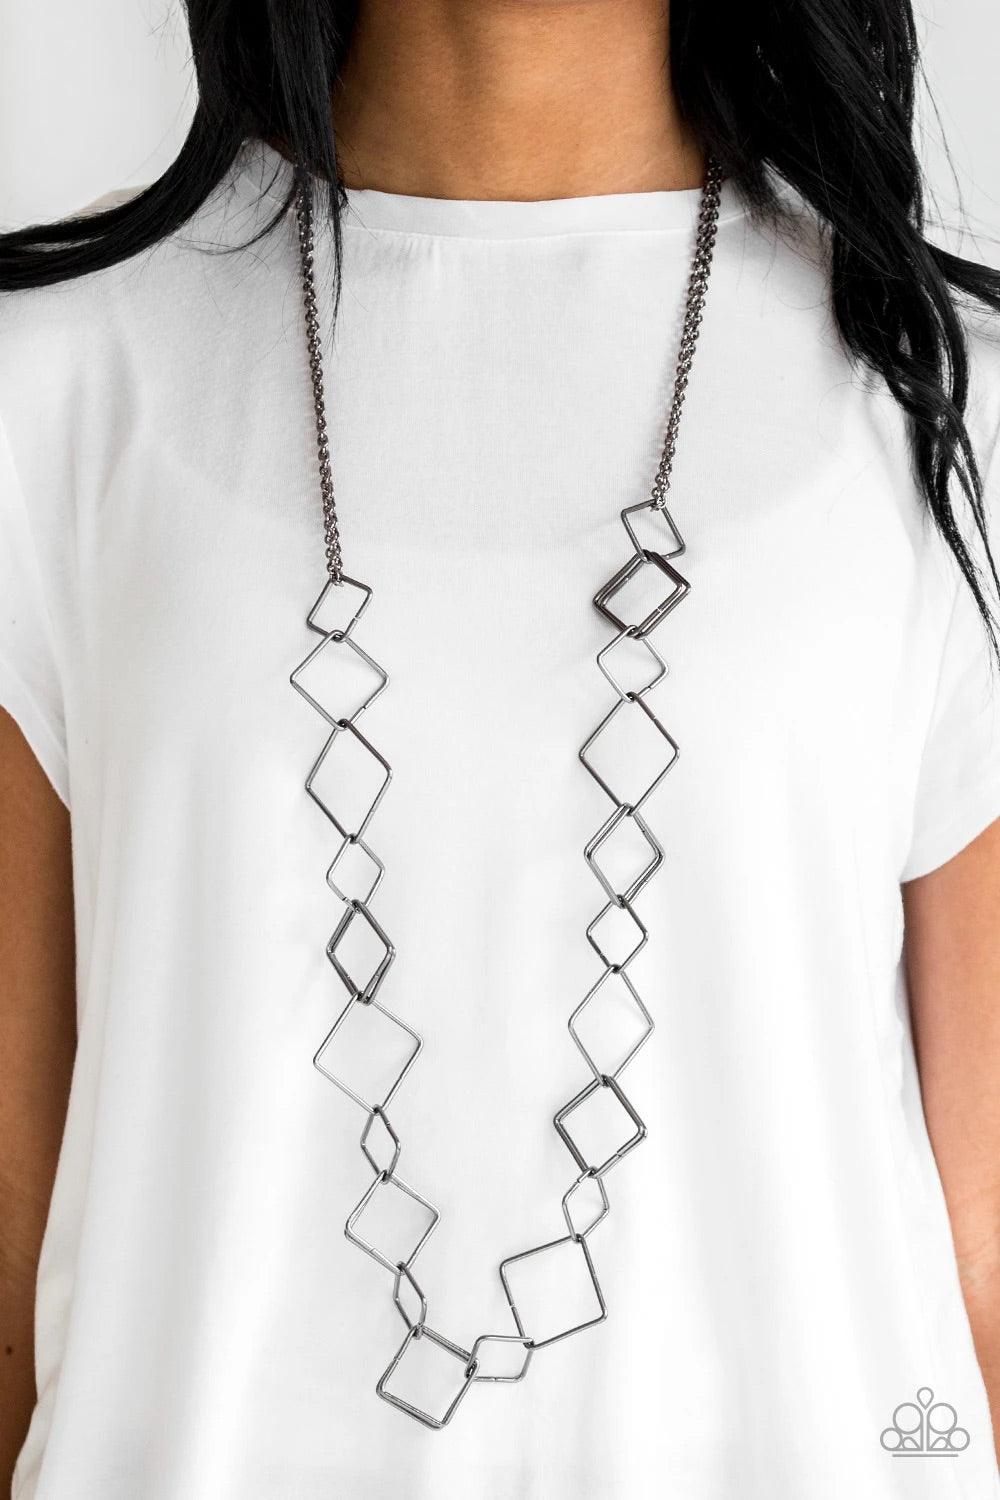 Paparazzi Accessories Backed Into A Corner - Black Varying in size, airy gunmetal square silhouettes link across the chest for an edgy look. Features an adjustable clasp closure. Sold as one individual necklace. Includes one pair of matching earrings. Jew